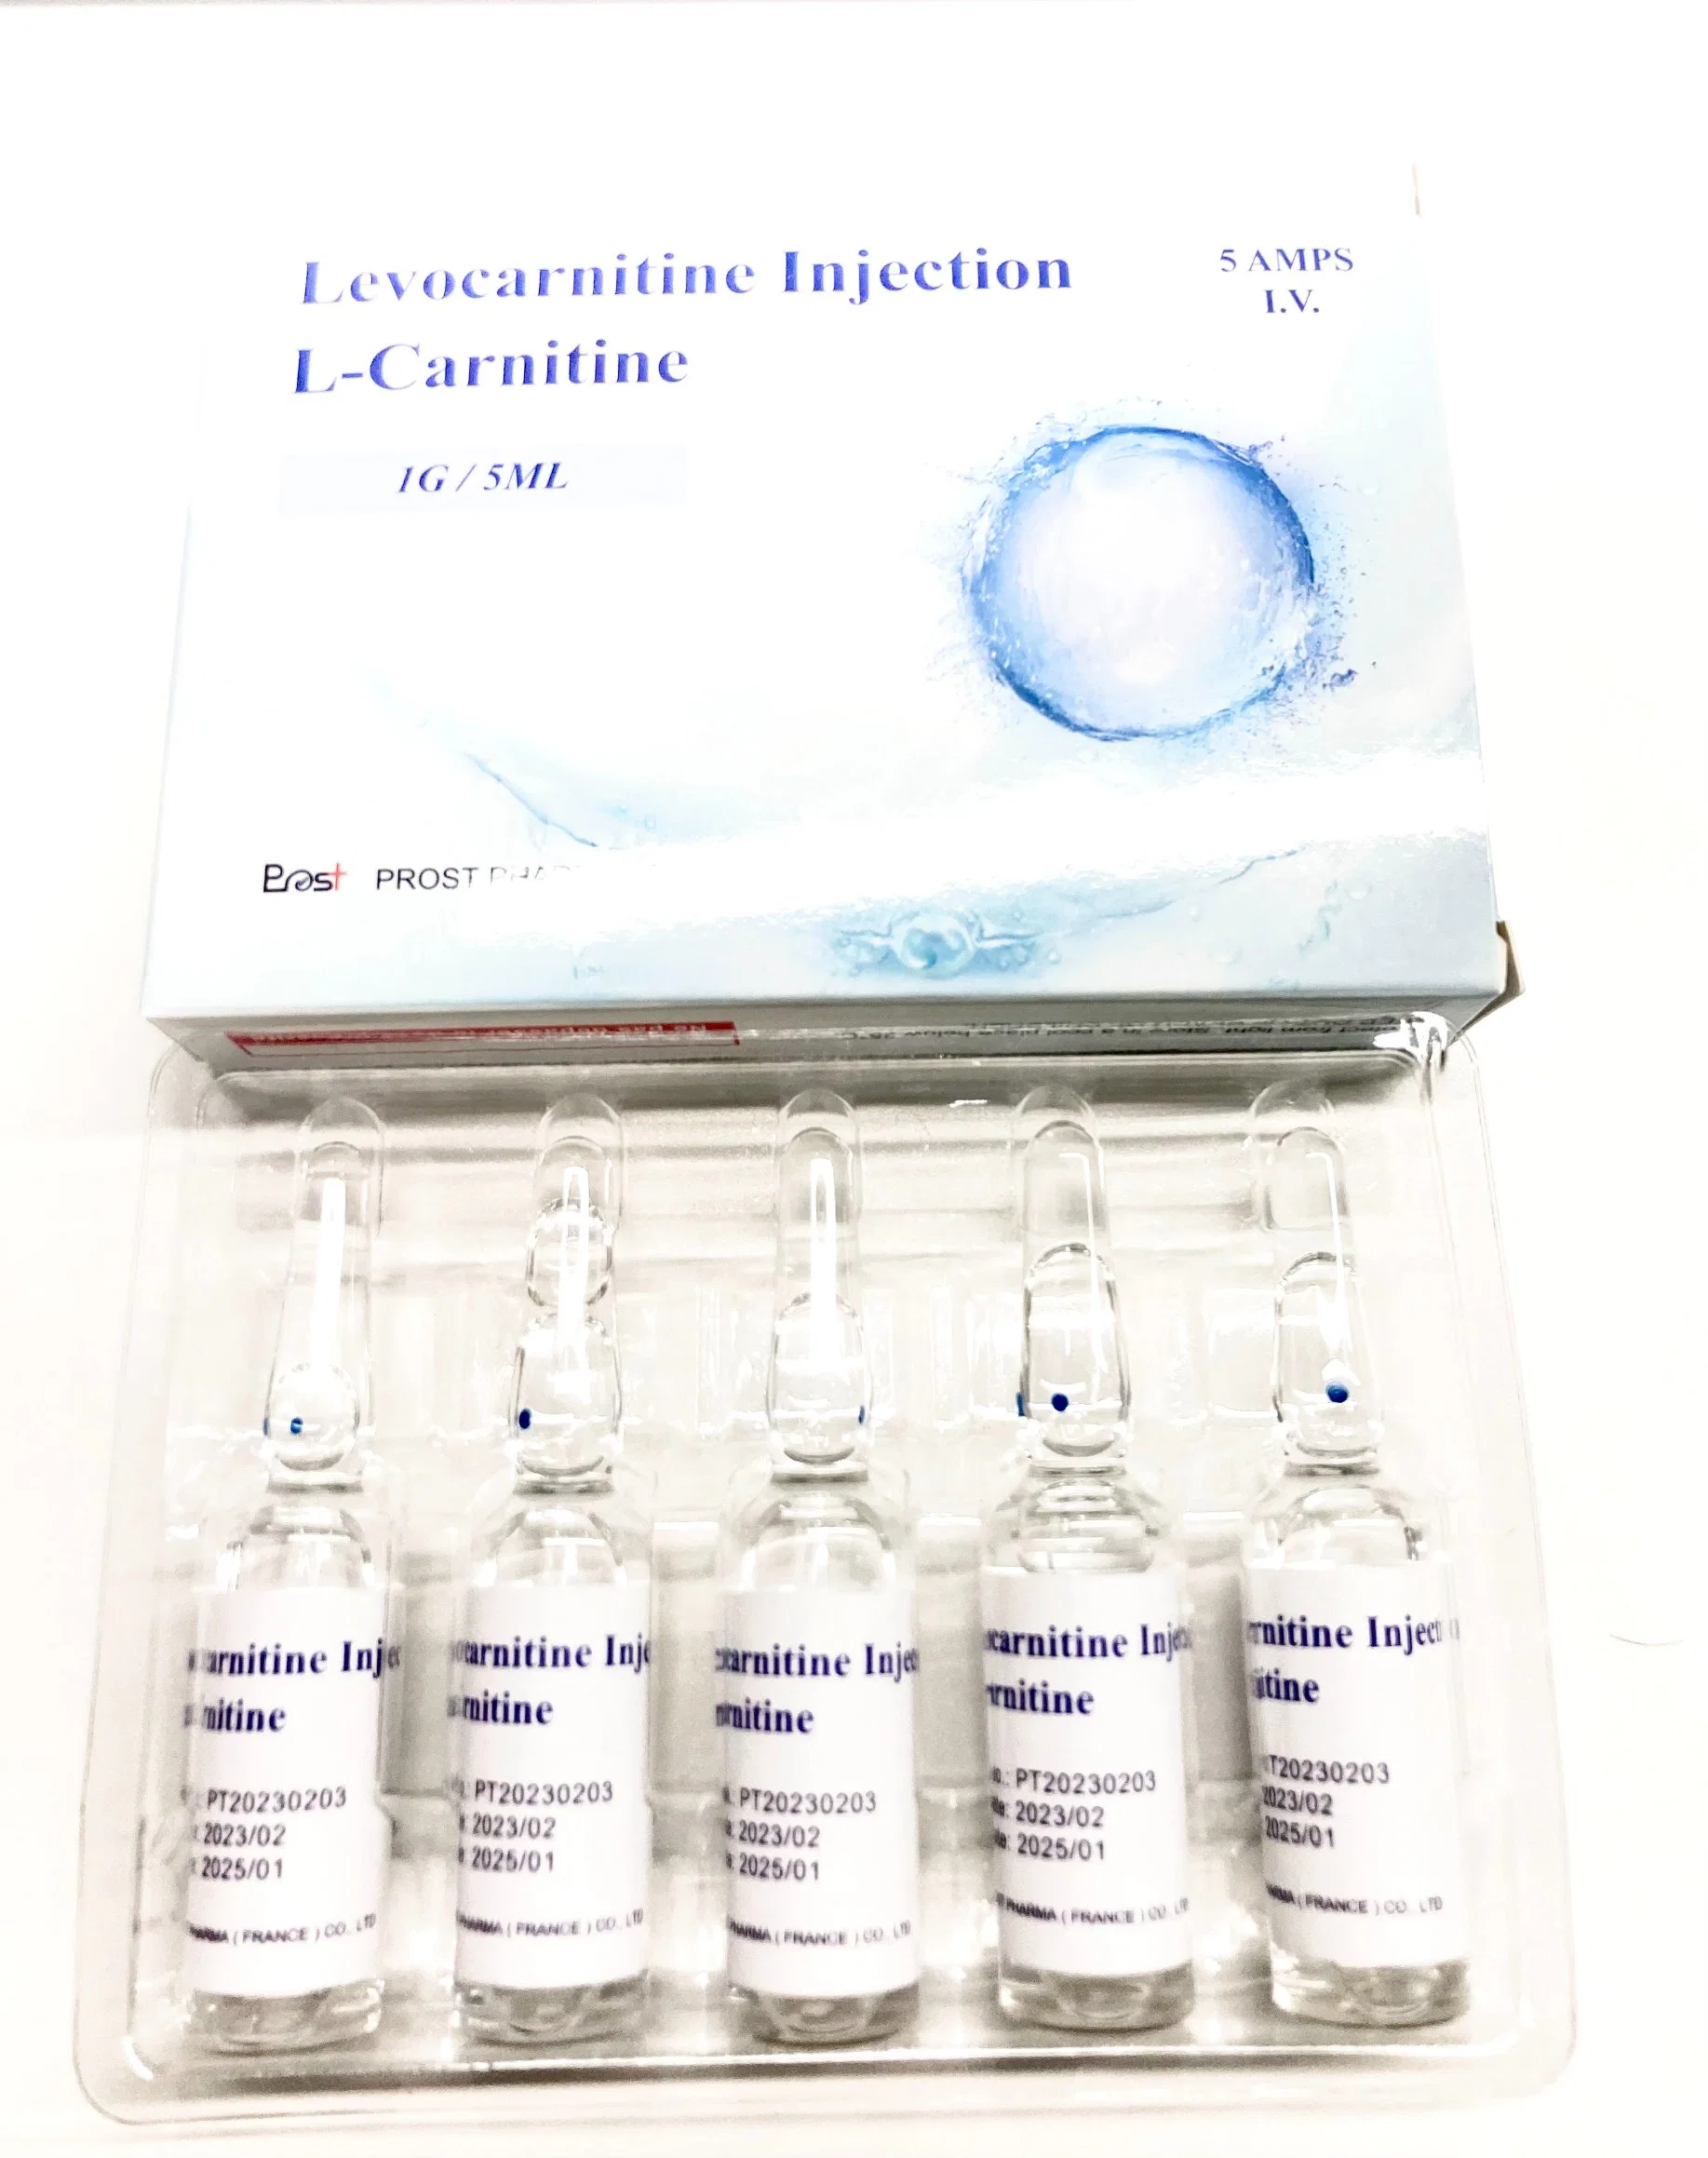 Beauty Product Slimming Injection L-Carnitine for Weight Loss